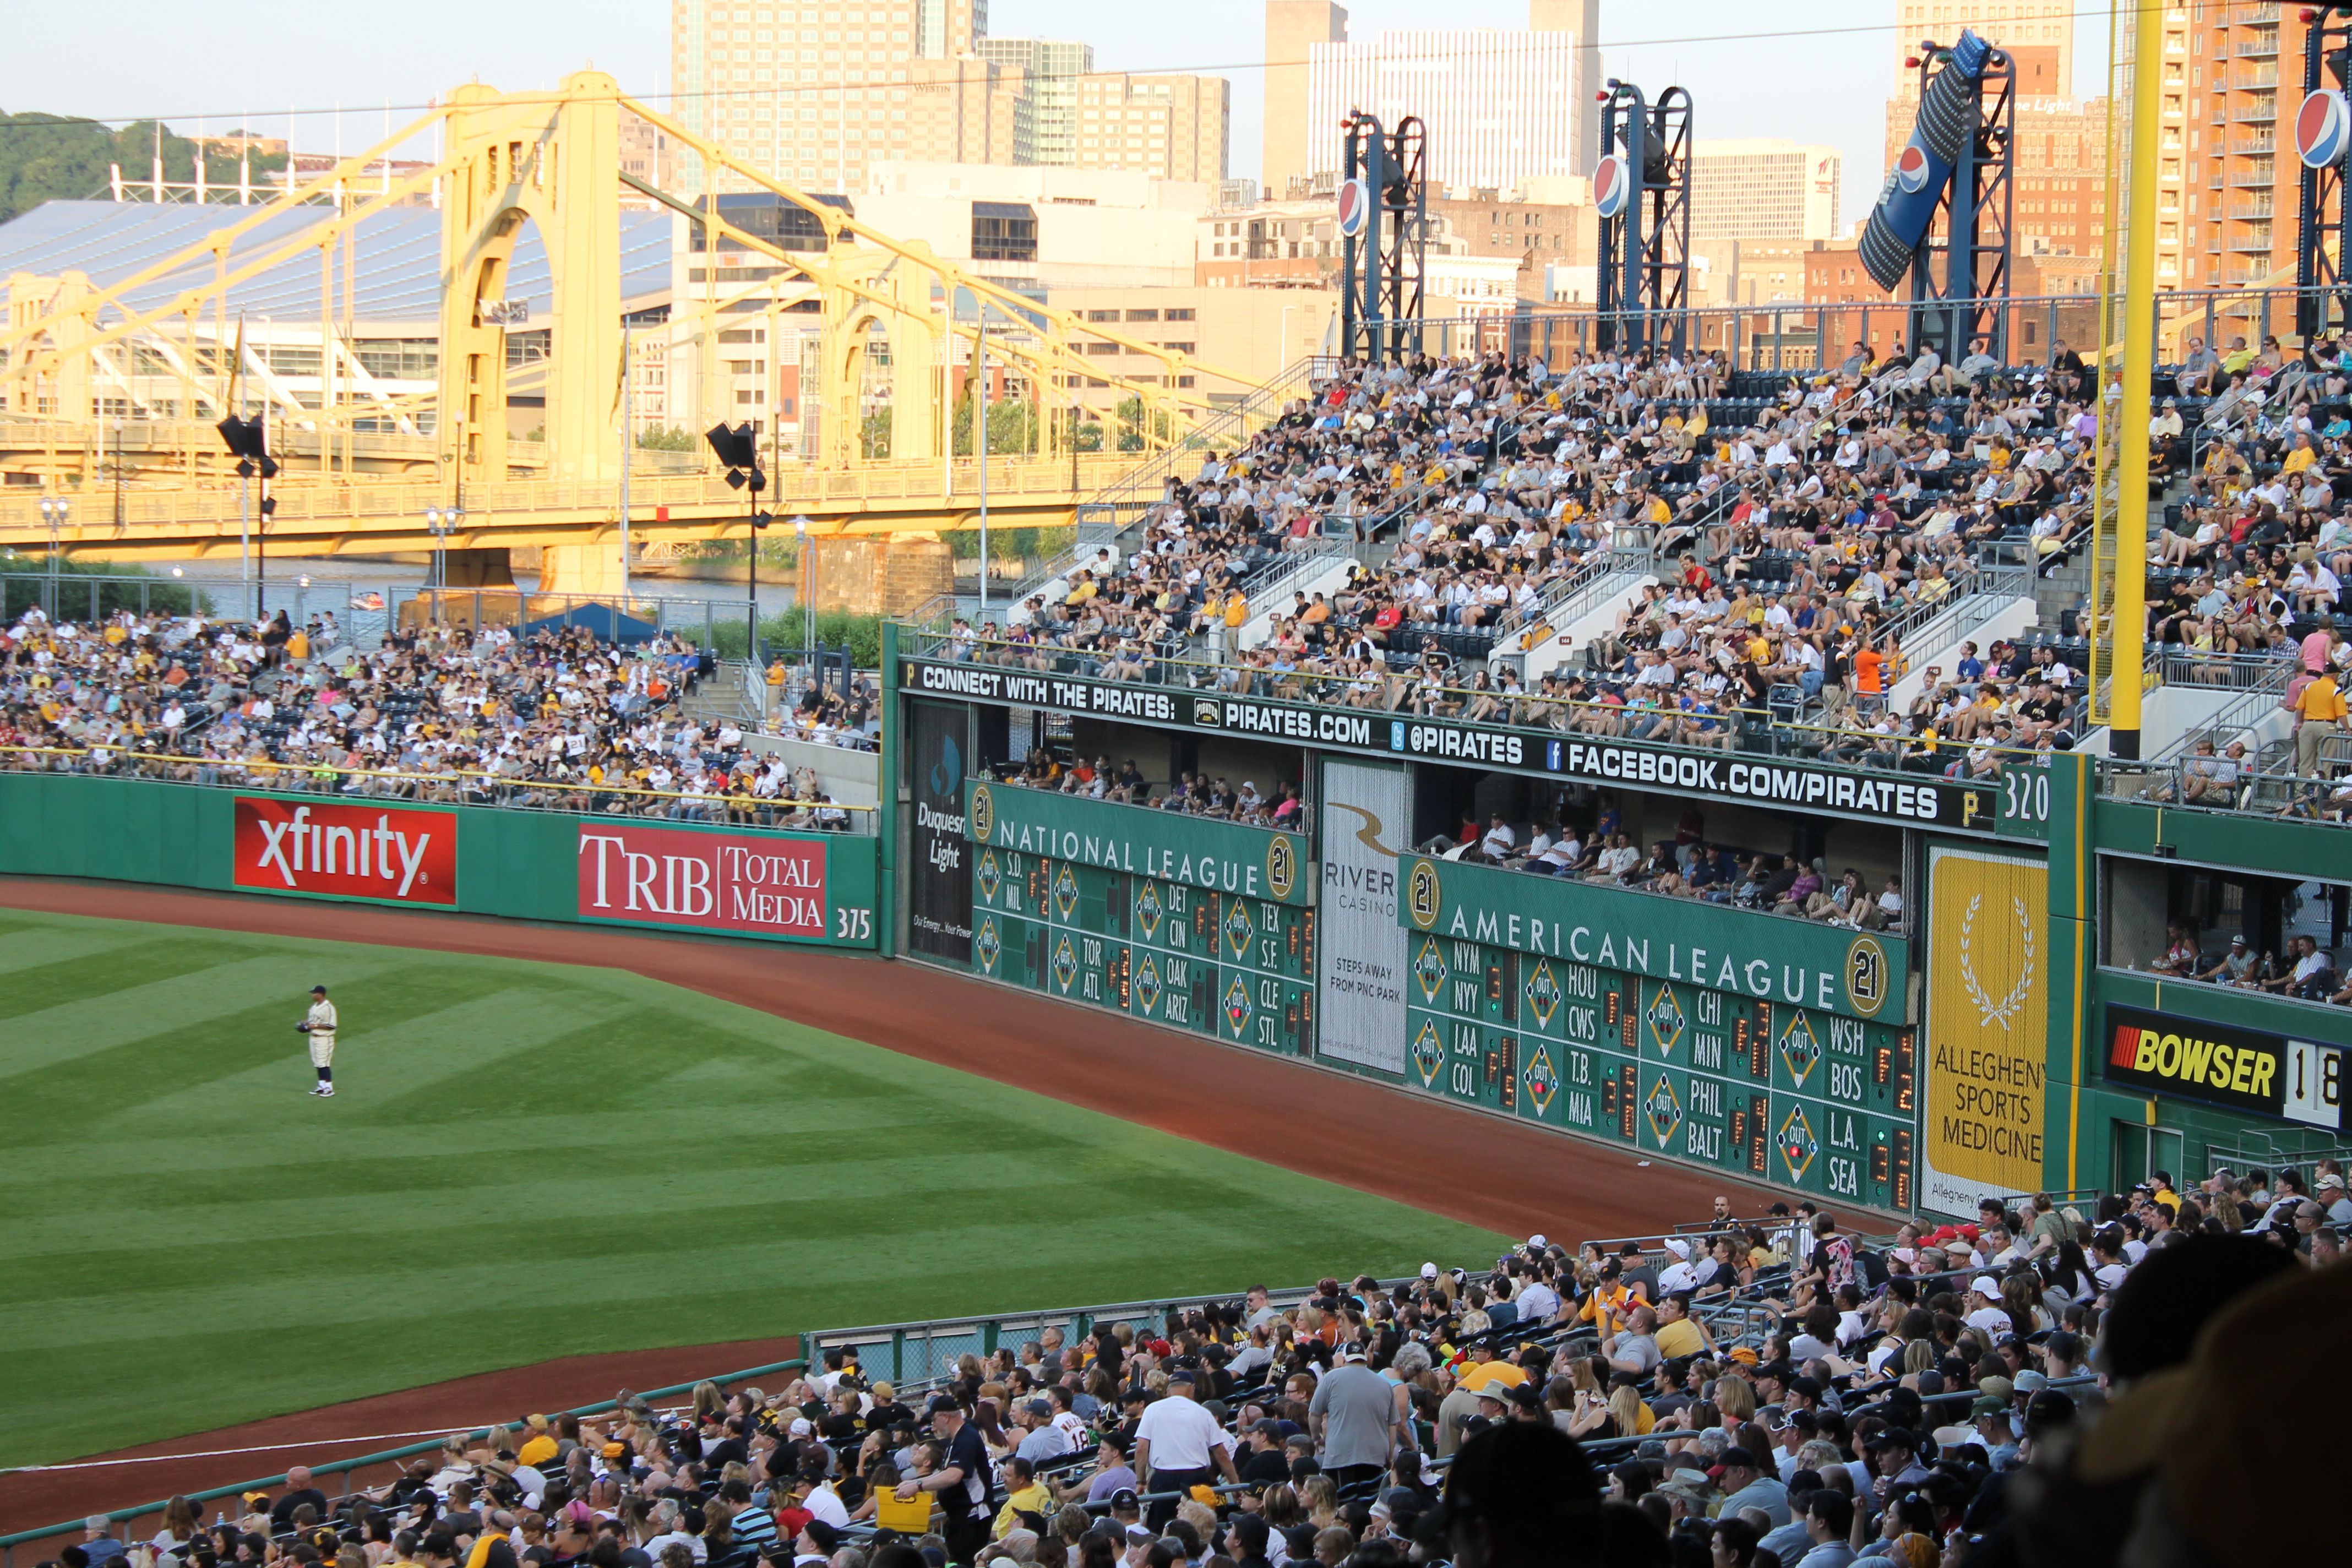 Pittsburgh Pirates - On this day in 2001, we opened the most beautiful  ballpark in America.